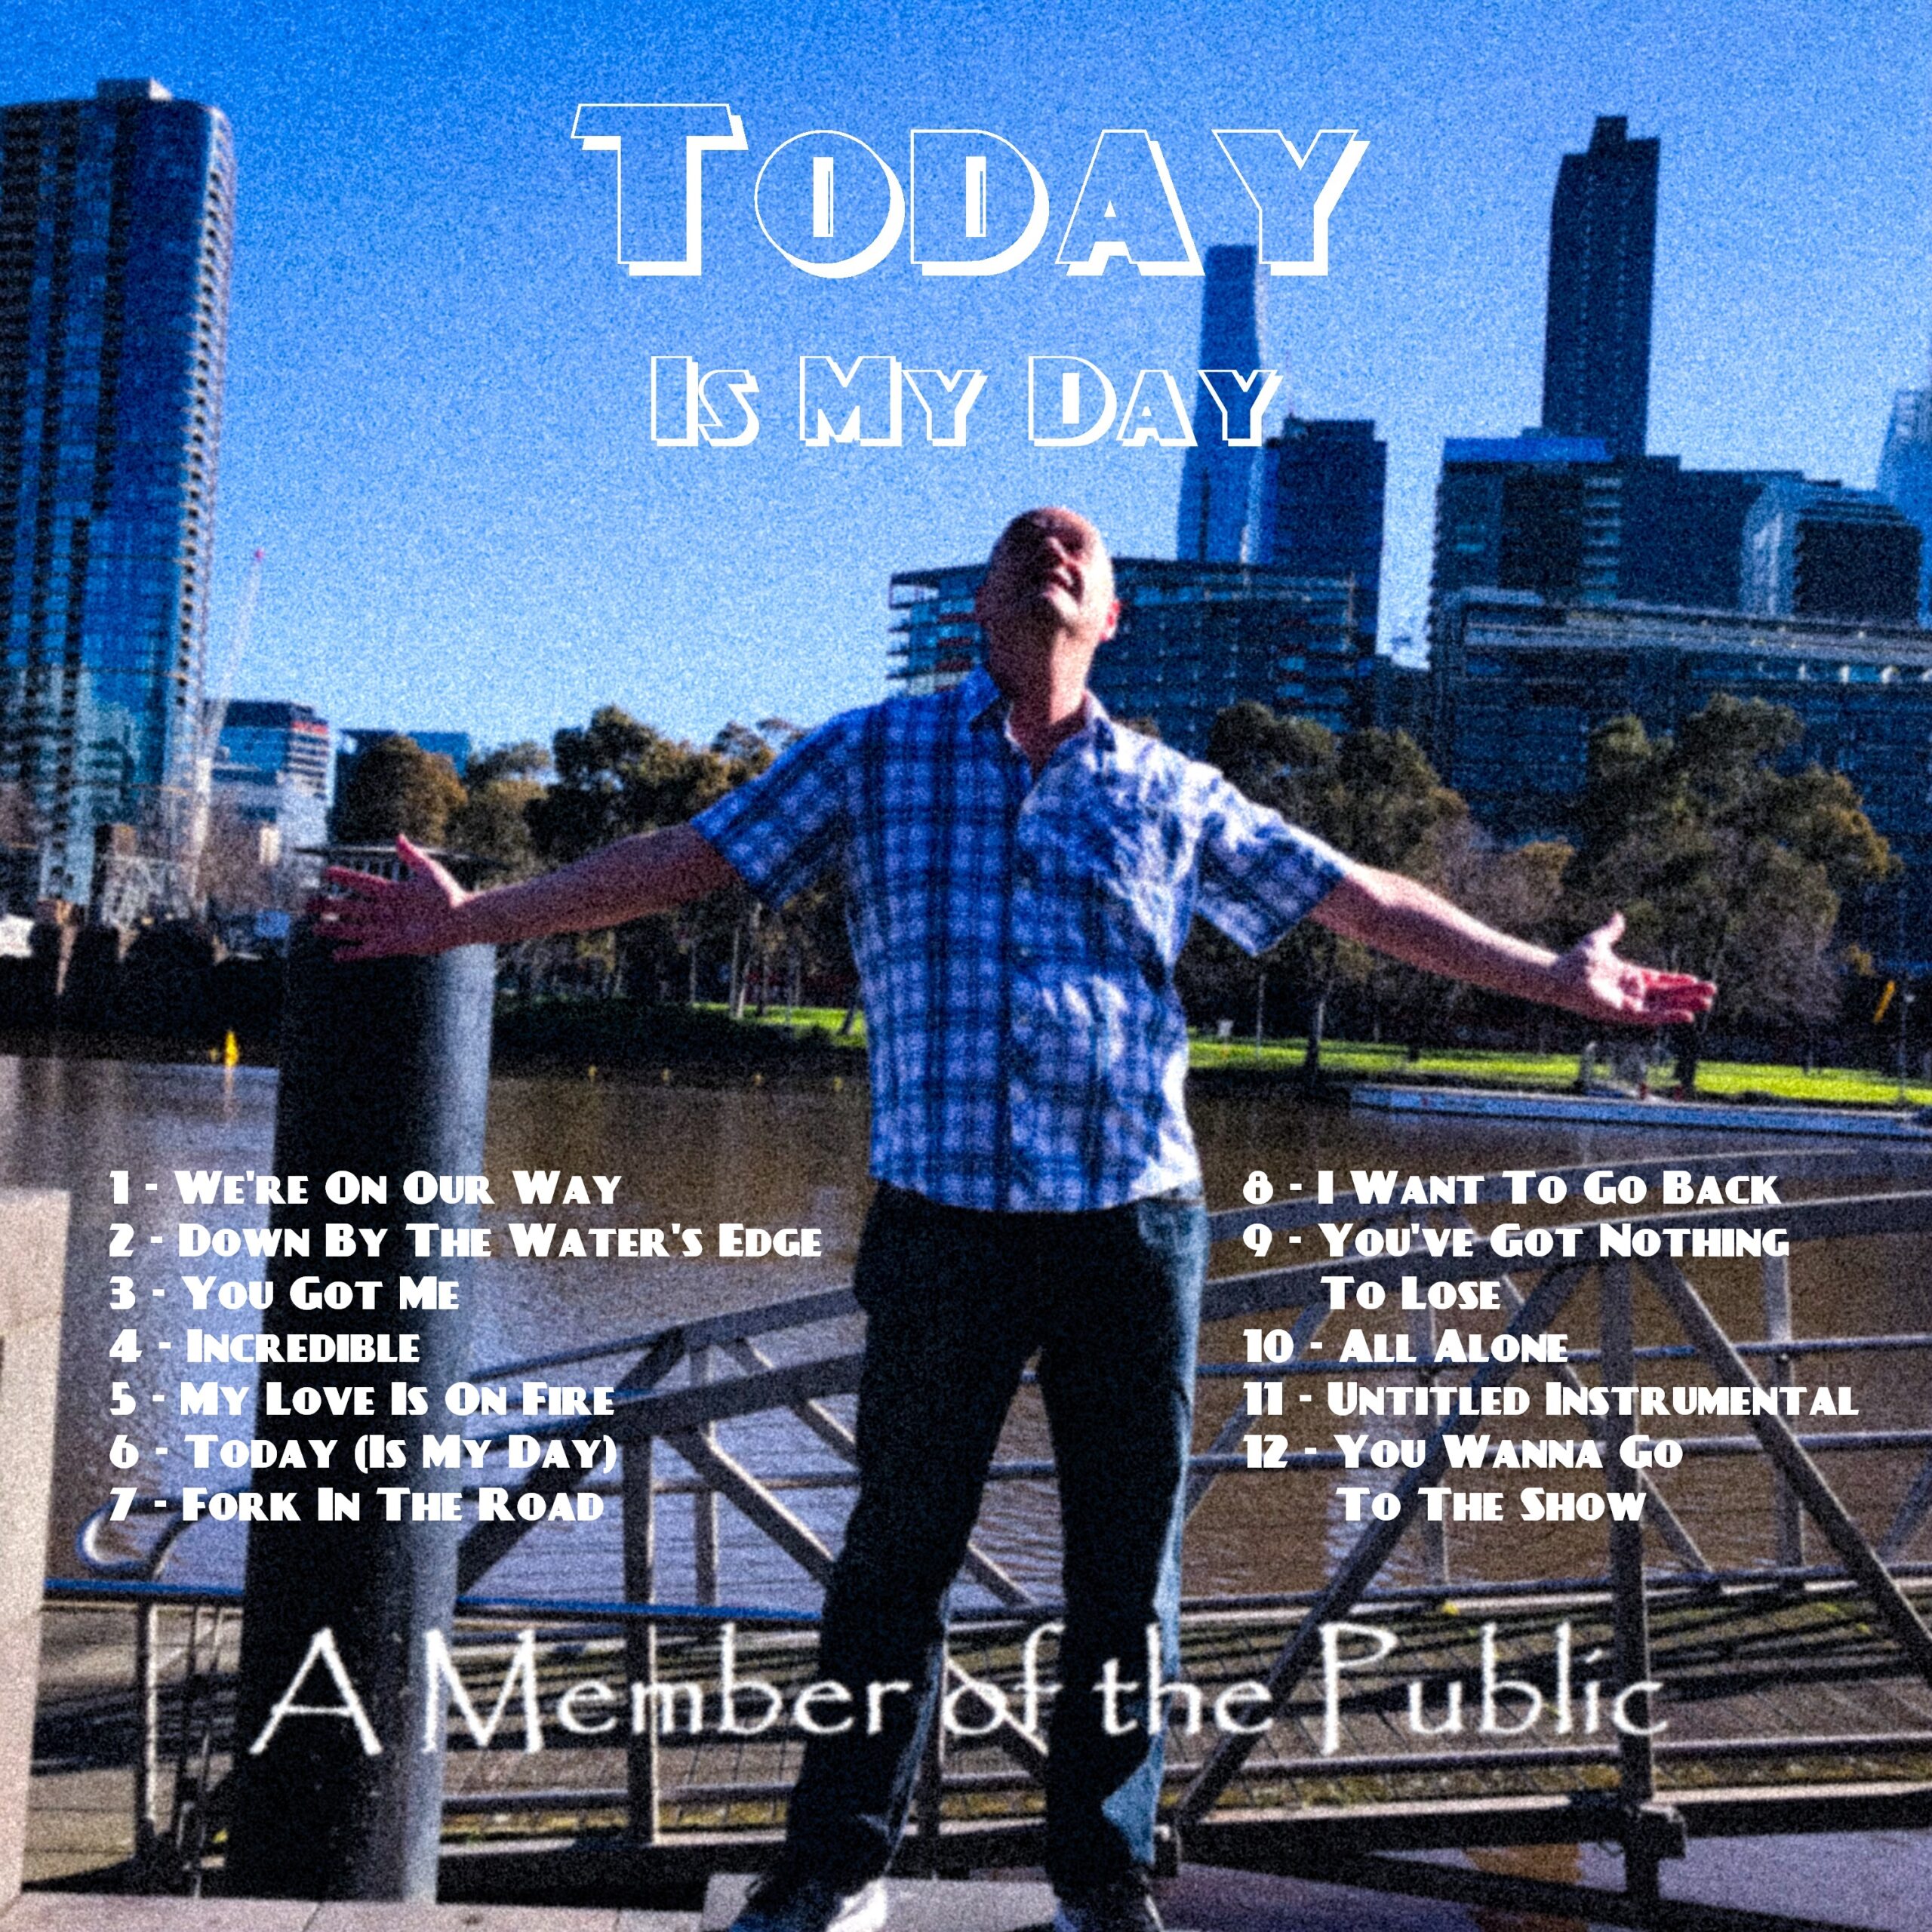 Today is my day - A Member of the Public